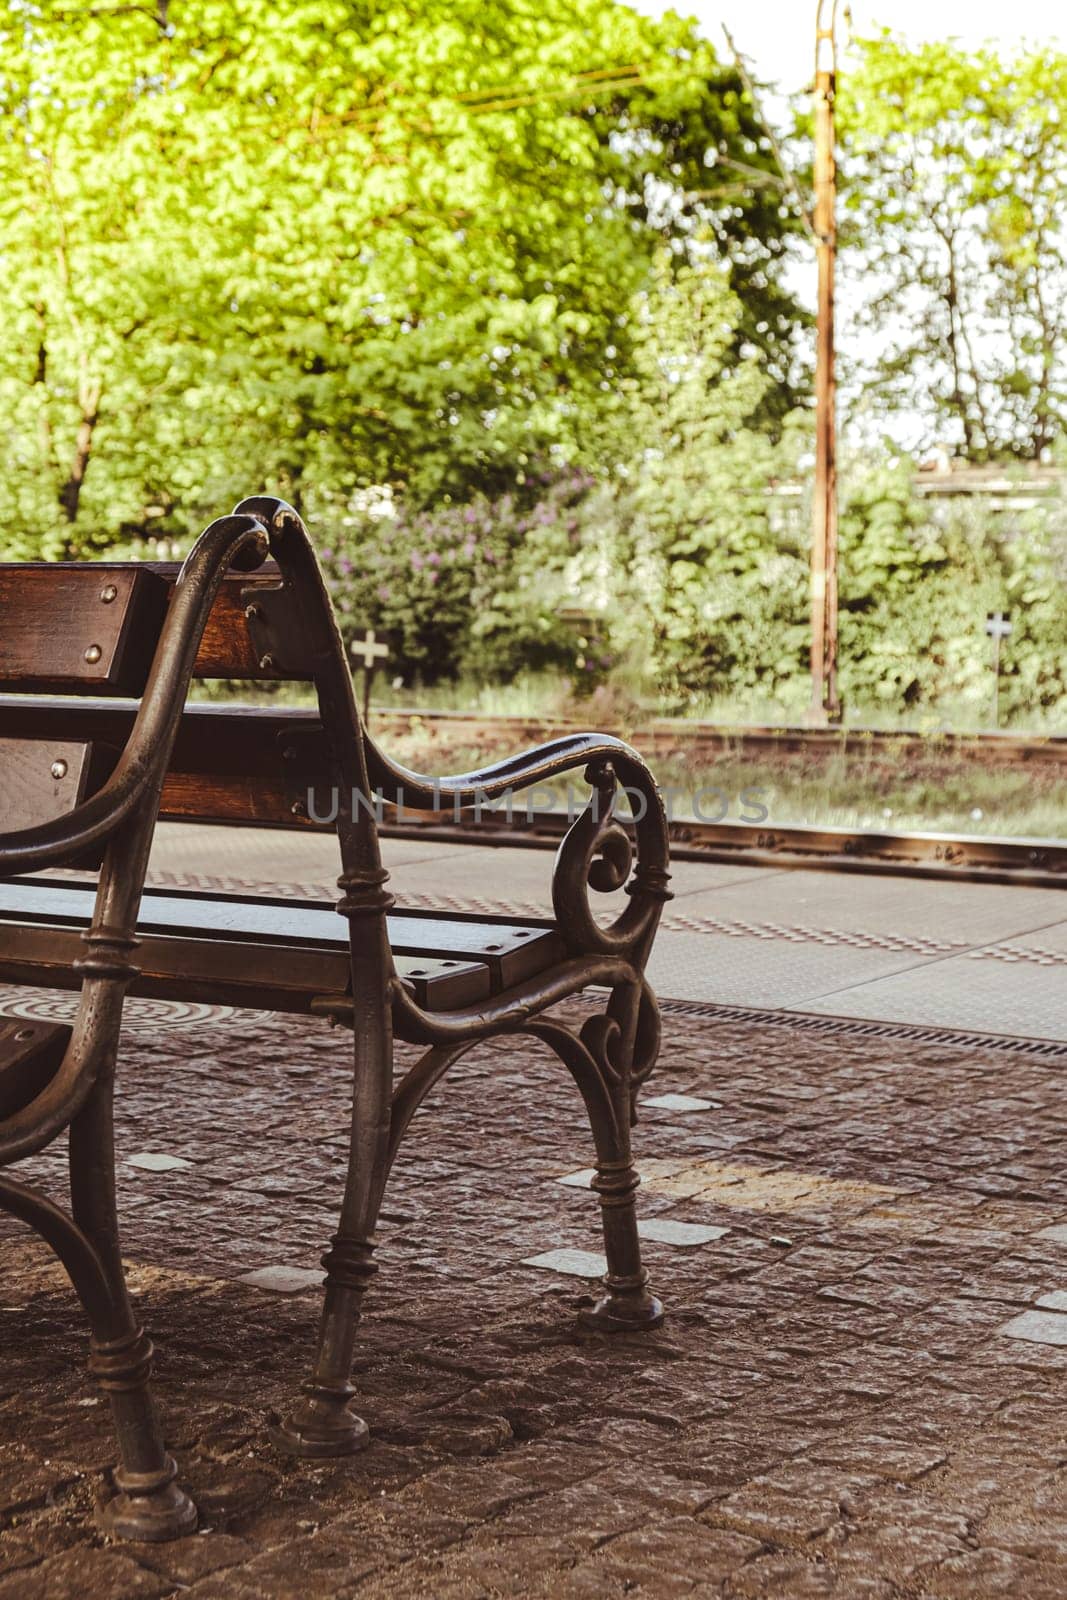 Railway station with empty bench. The way forward railway for train. Empty Railway track for locomotive. Transportation system Nature background around. travel tourist concept